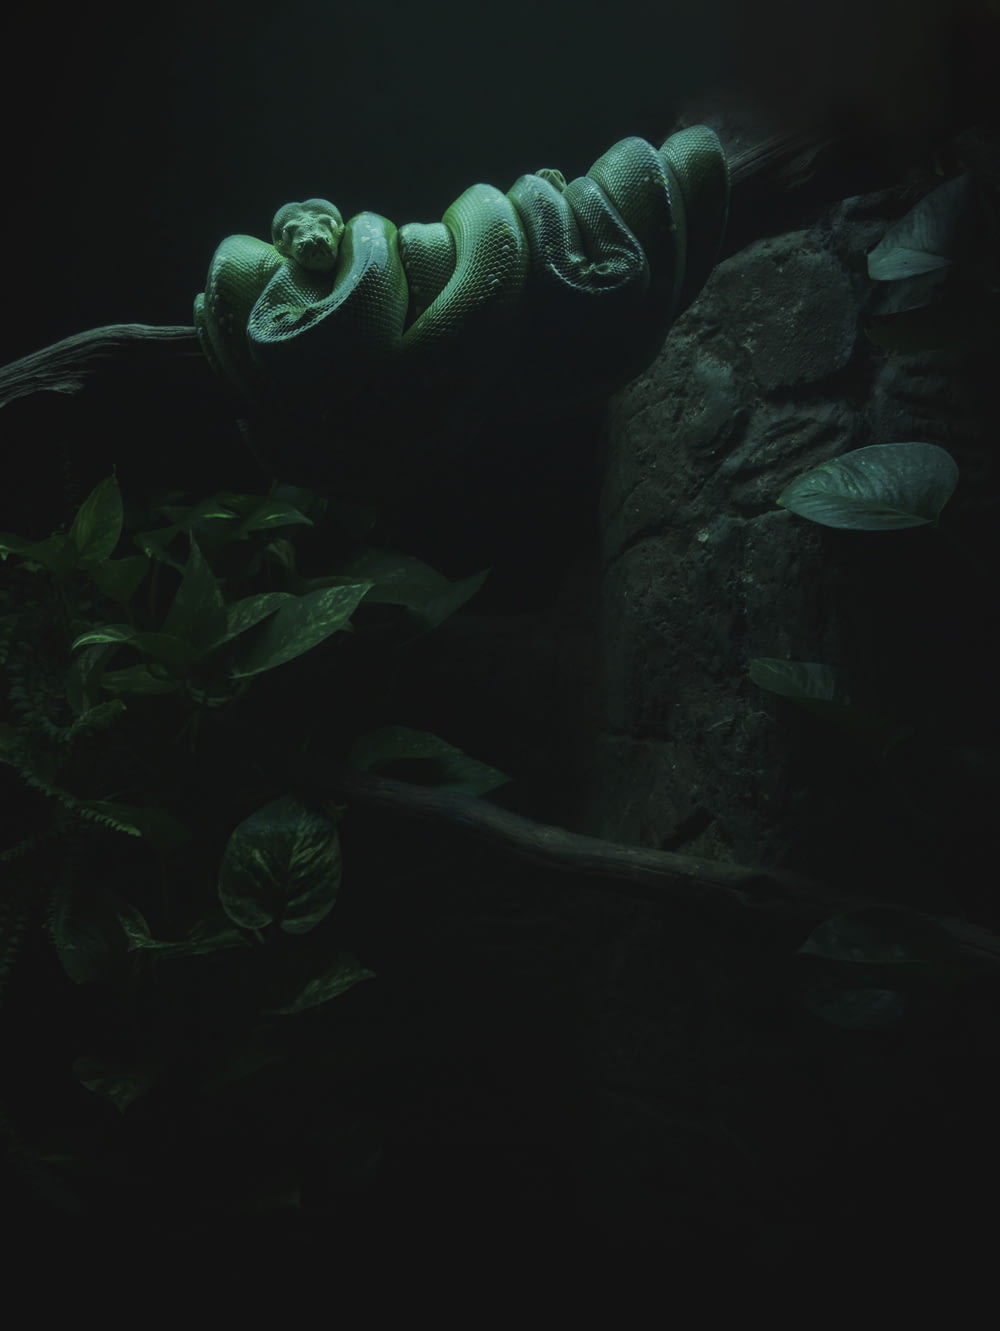 a green snake curled up on a rock in the dark